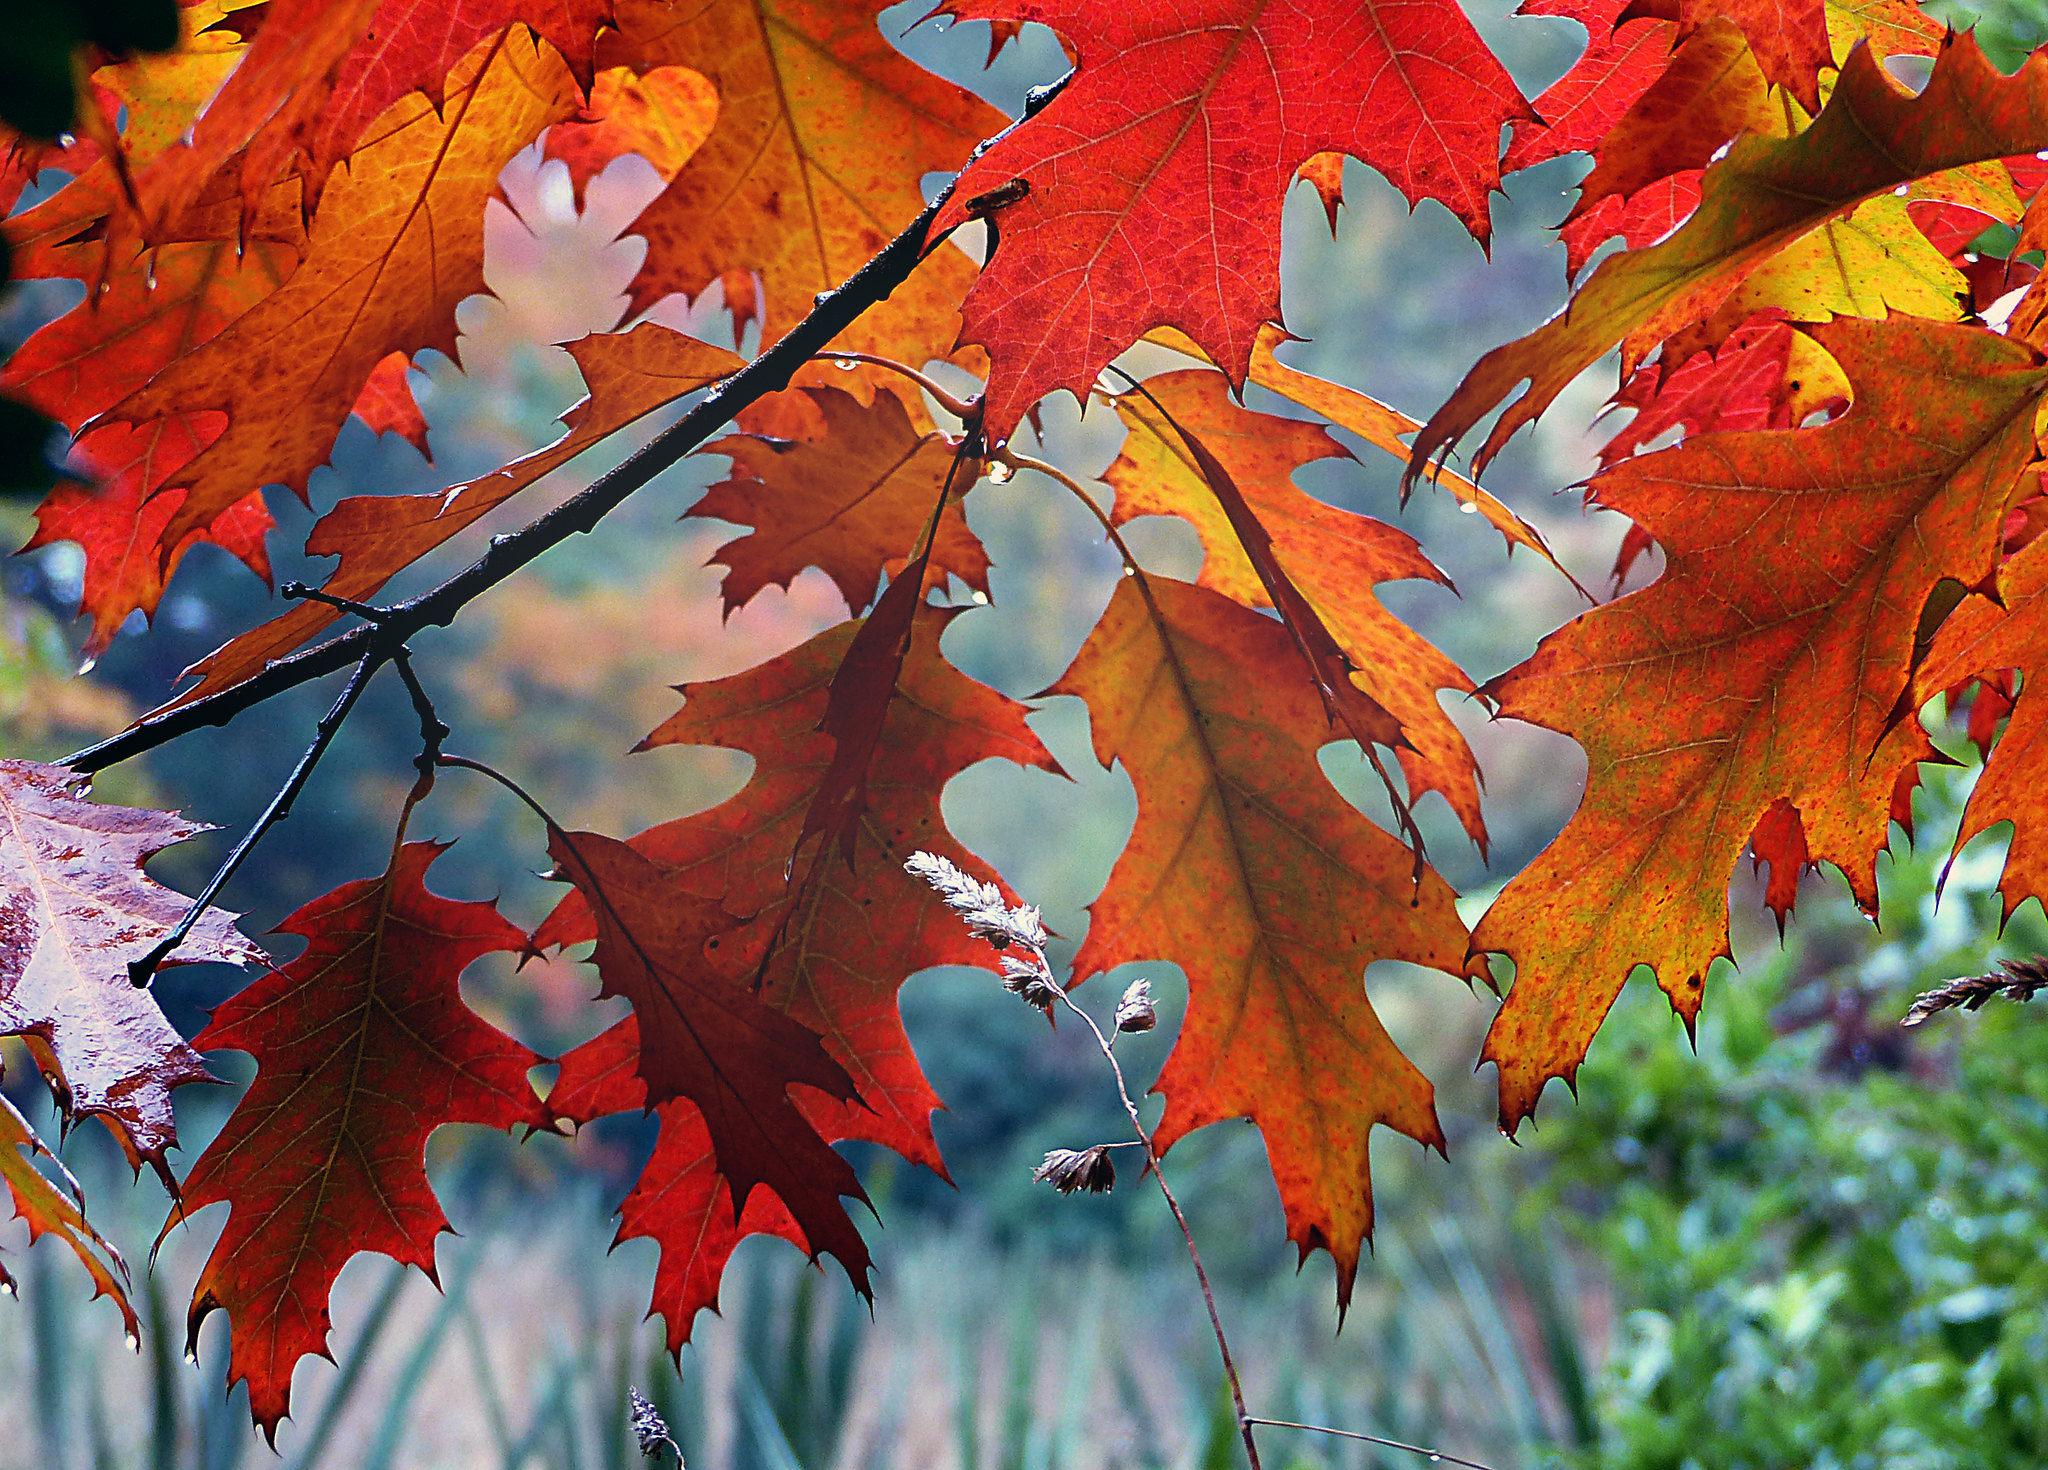 A photo of red oak leaves in autumn. (photo © Bernard Sprague via the Flickr Creative Commons)